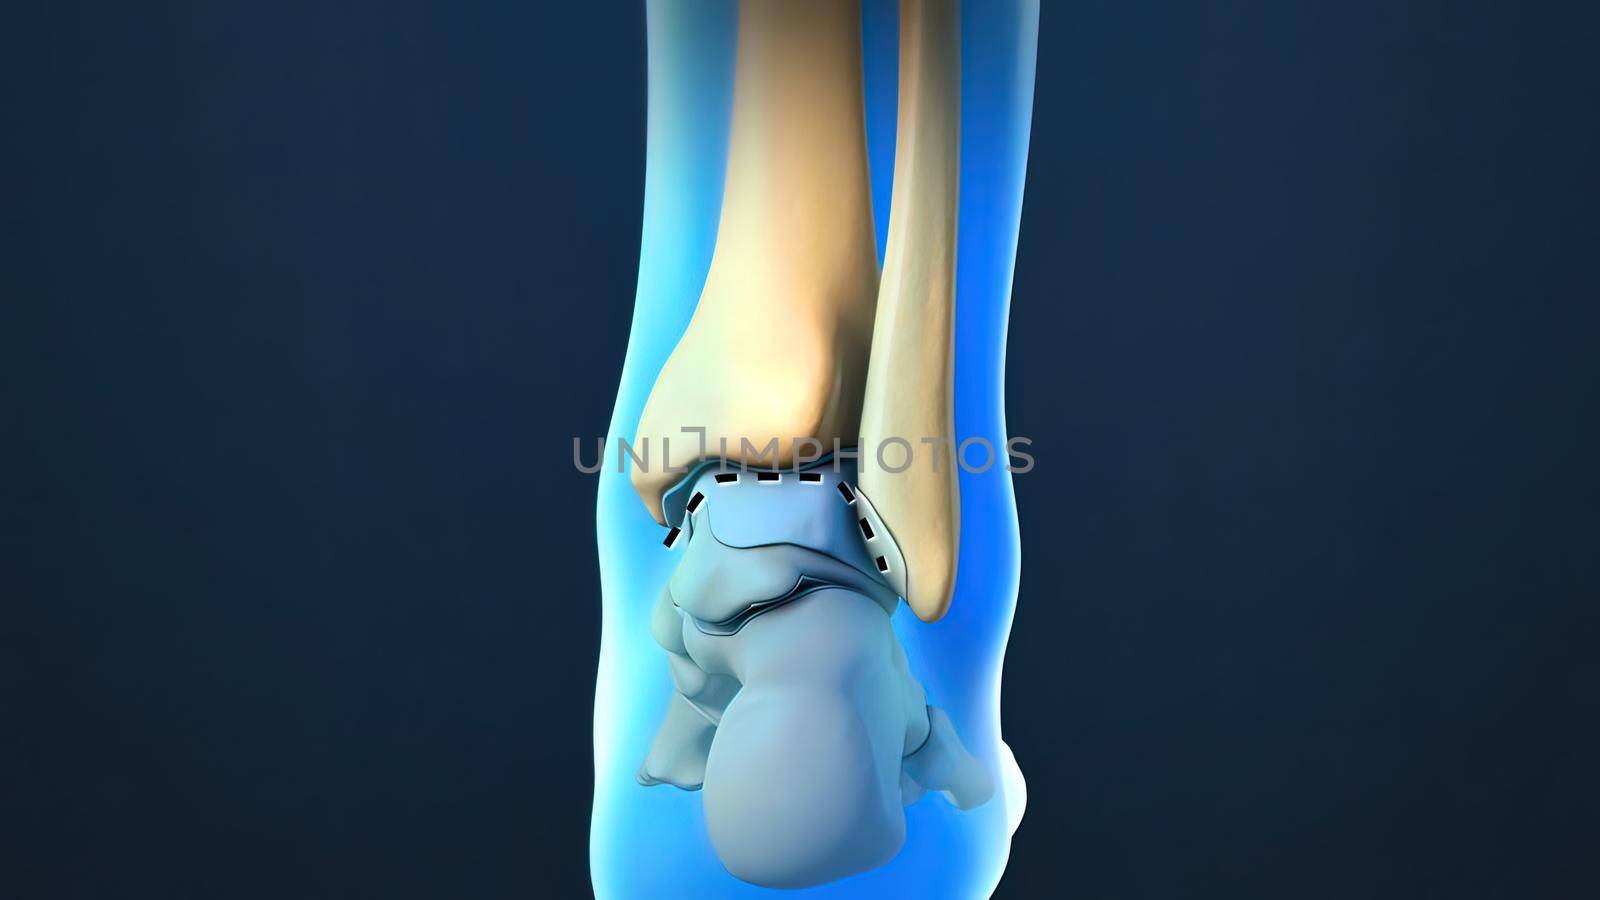 Ankle Joint Anatomy and articular cartilage 3d Render by creativepic